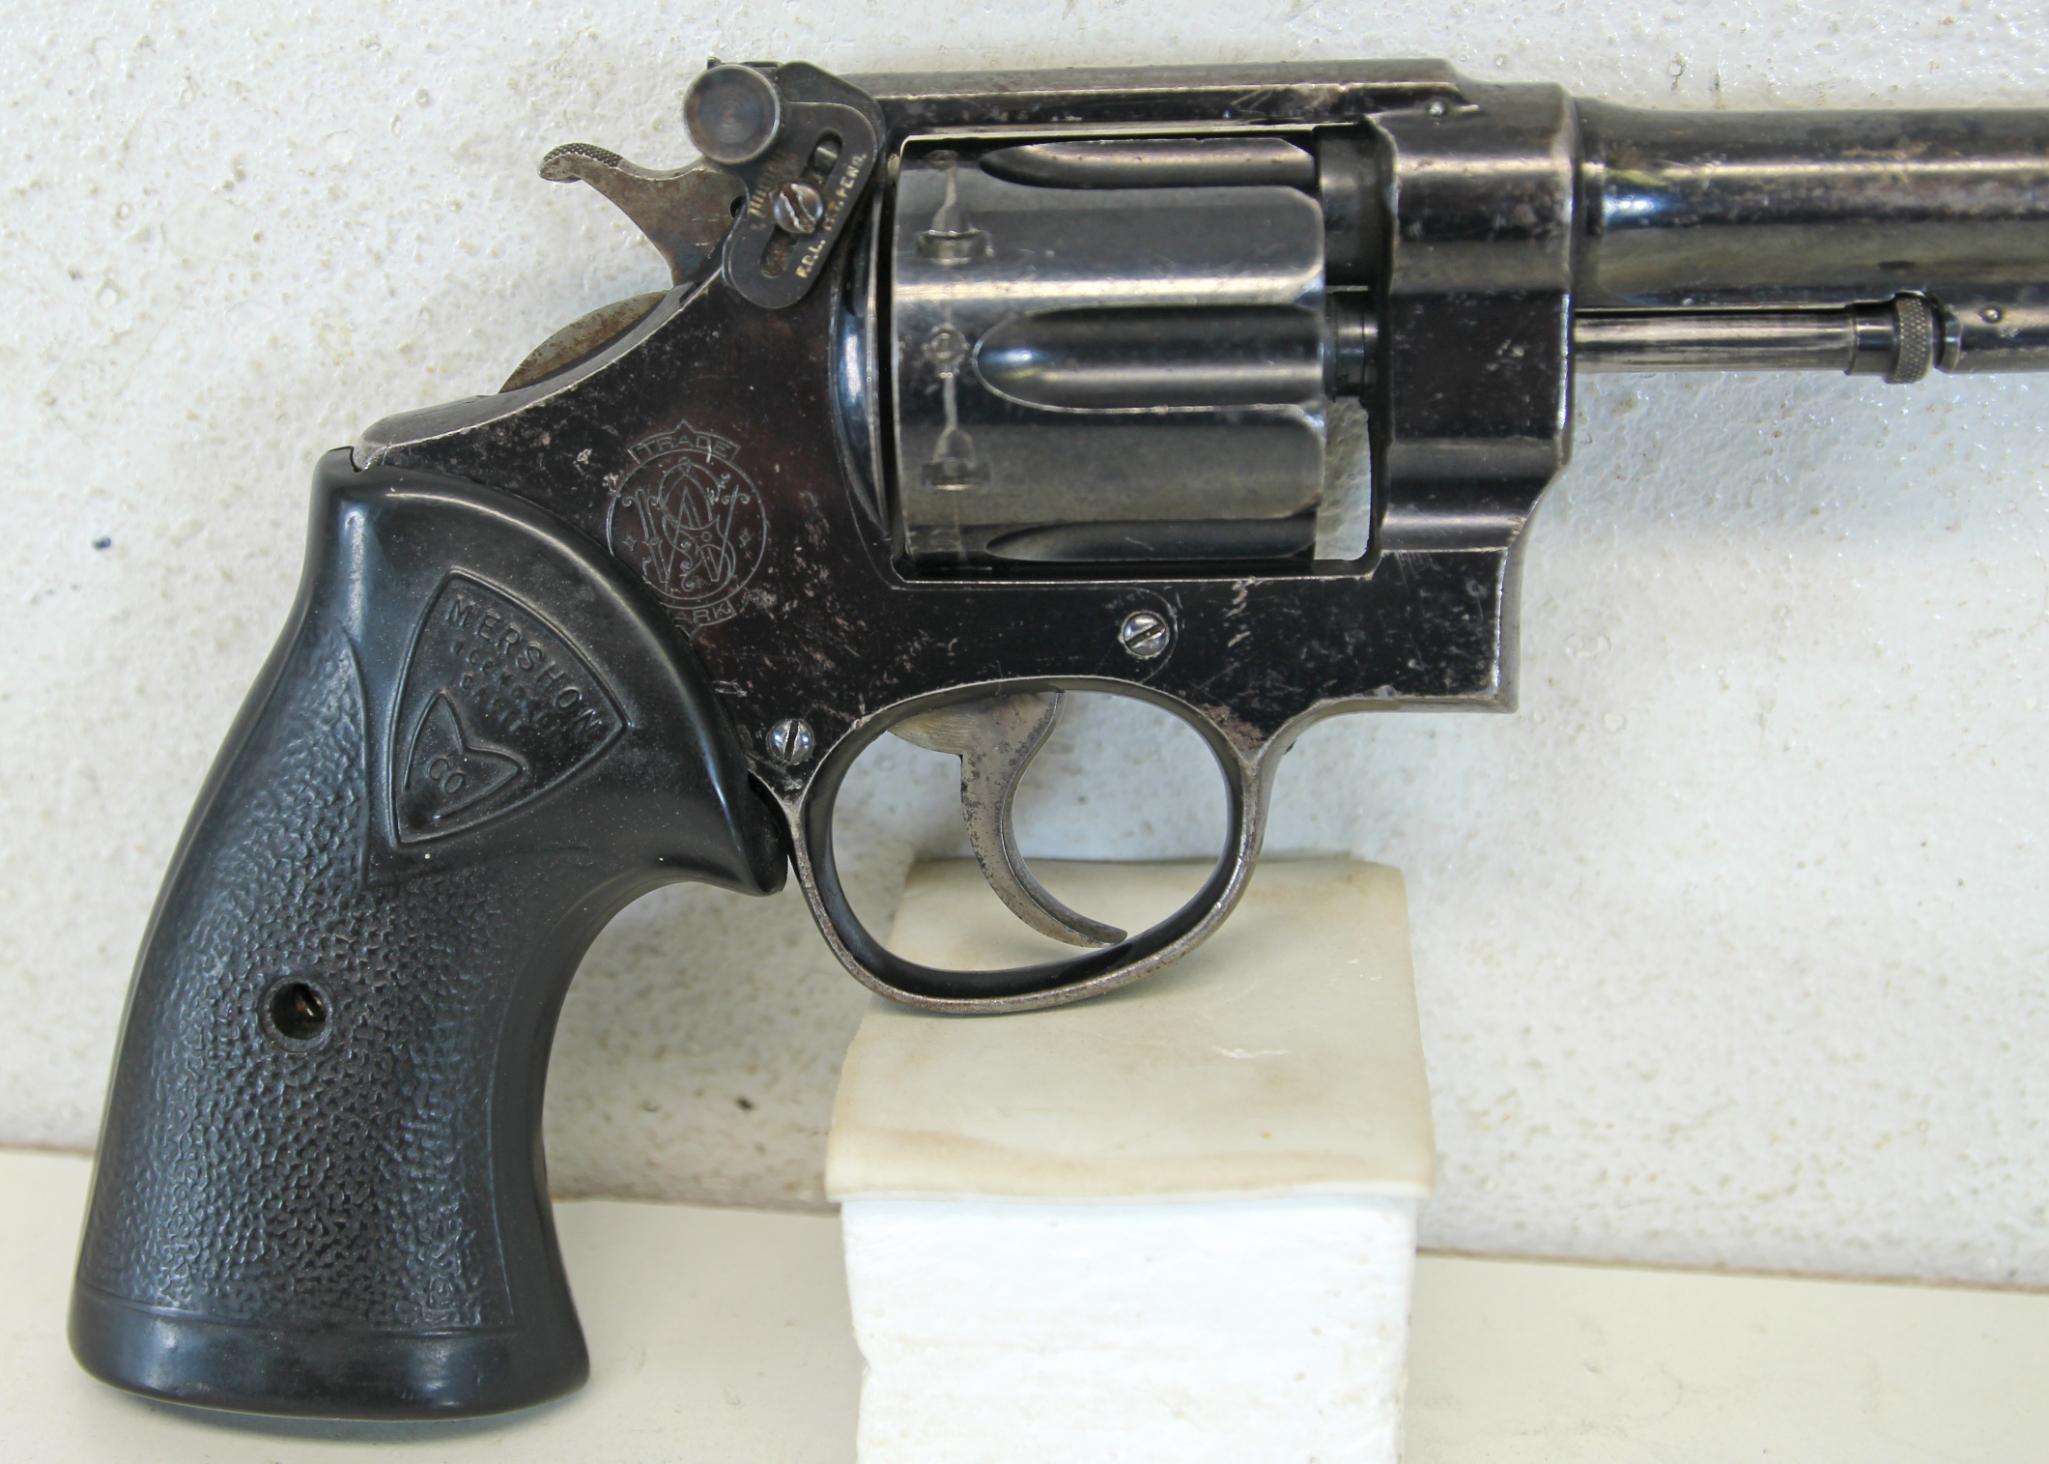 Smith & Wesson 1917 Lend Lease .45 Colt or .45 ACP with Moon Clips Double Action Revolver Not